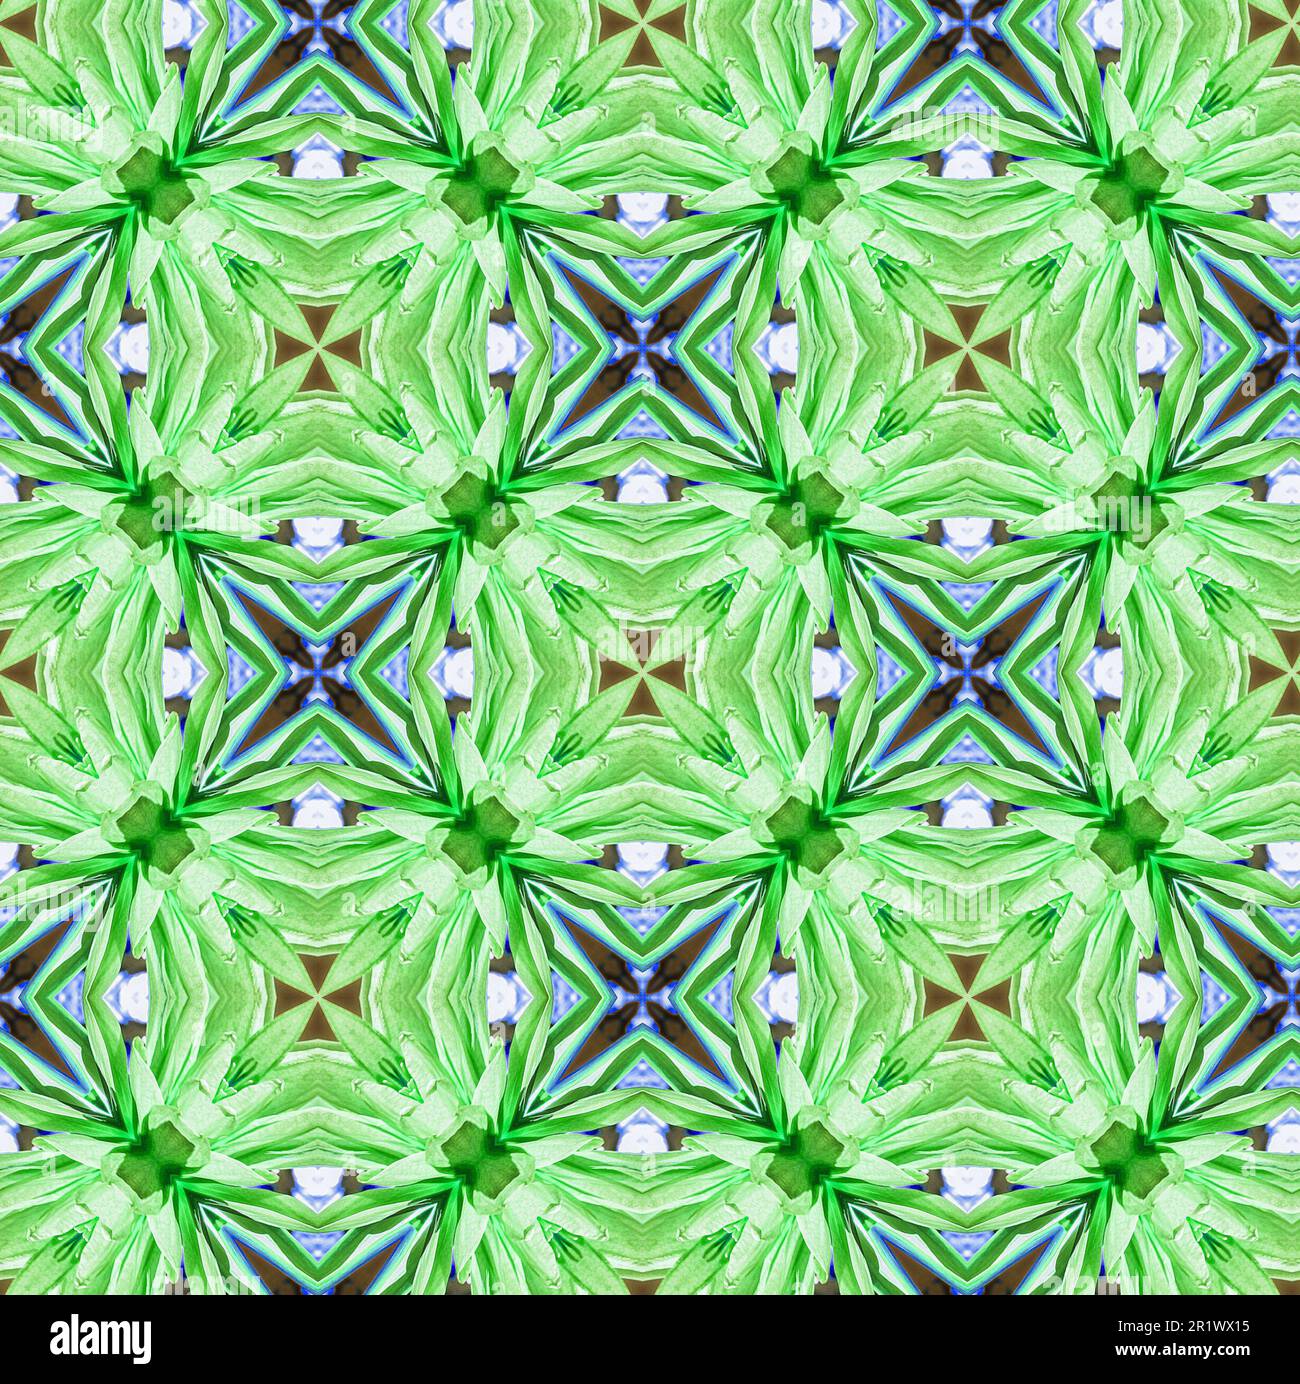 Seamless design painterly abstract pattern with organic flower petal motifs in geometric repeating design in green and blue. Stock Photo